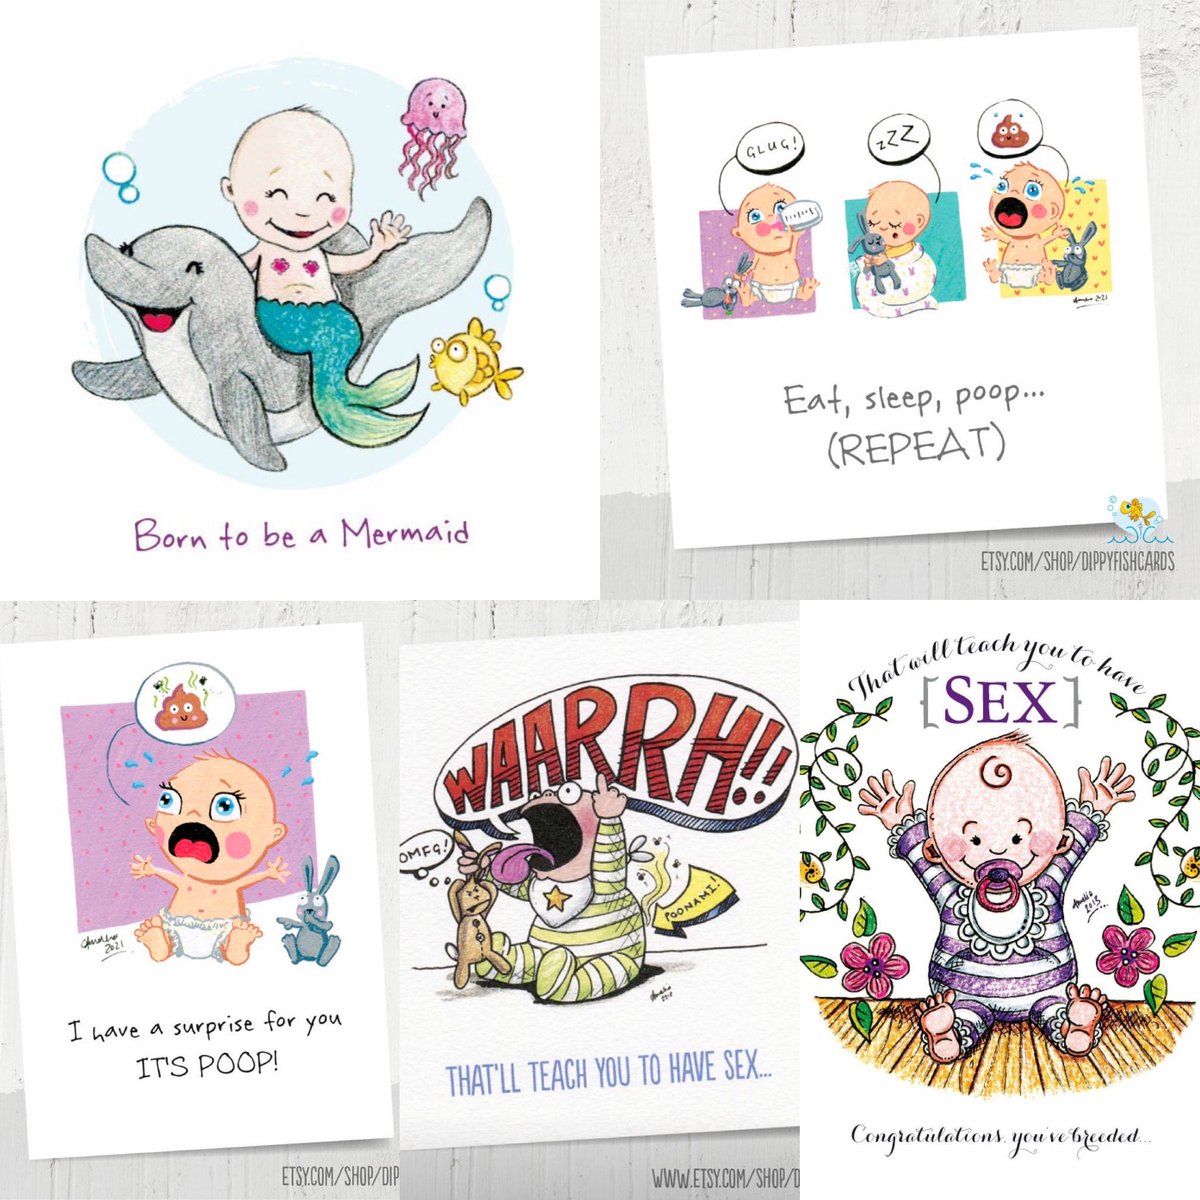 Need a card for a new baby? (maybe a new father this Father’s Day?) Here are a few of mine that cut through the normal pink and blue schmaltzy affairs! #mhhsbd #earlybiz #newbaby Dippyfishcards.etsy.com